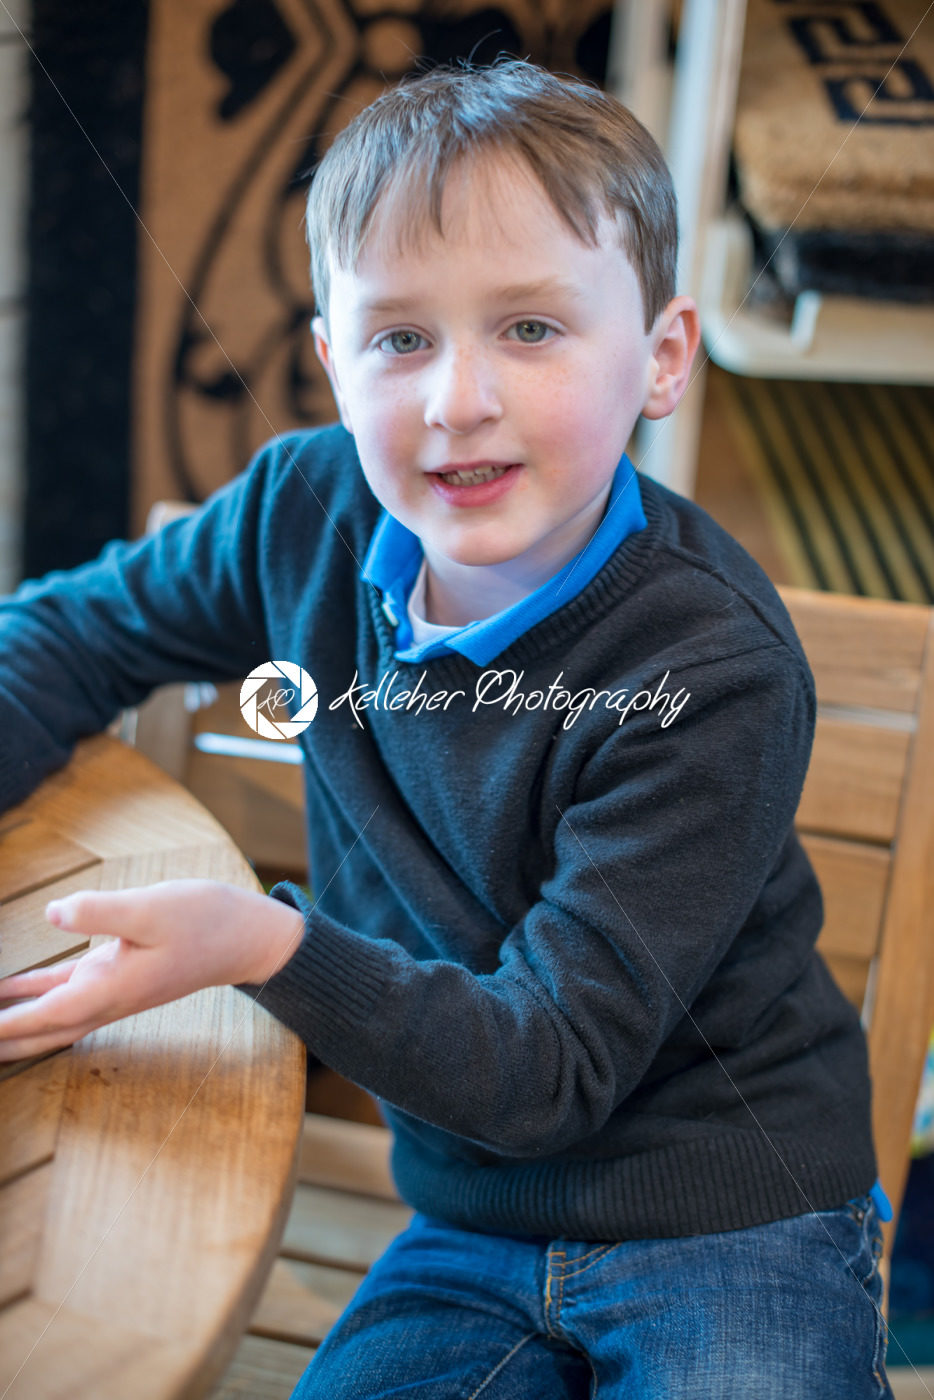 handsome young boy sits in chair all dressed up for Easter holidays - Kelleher Photography Store